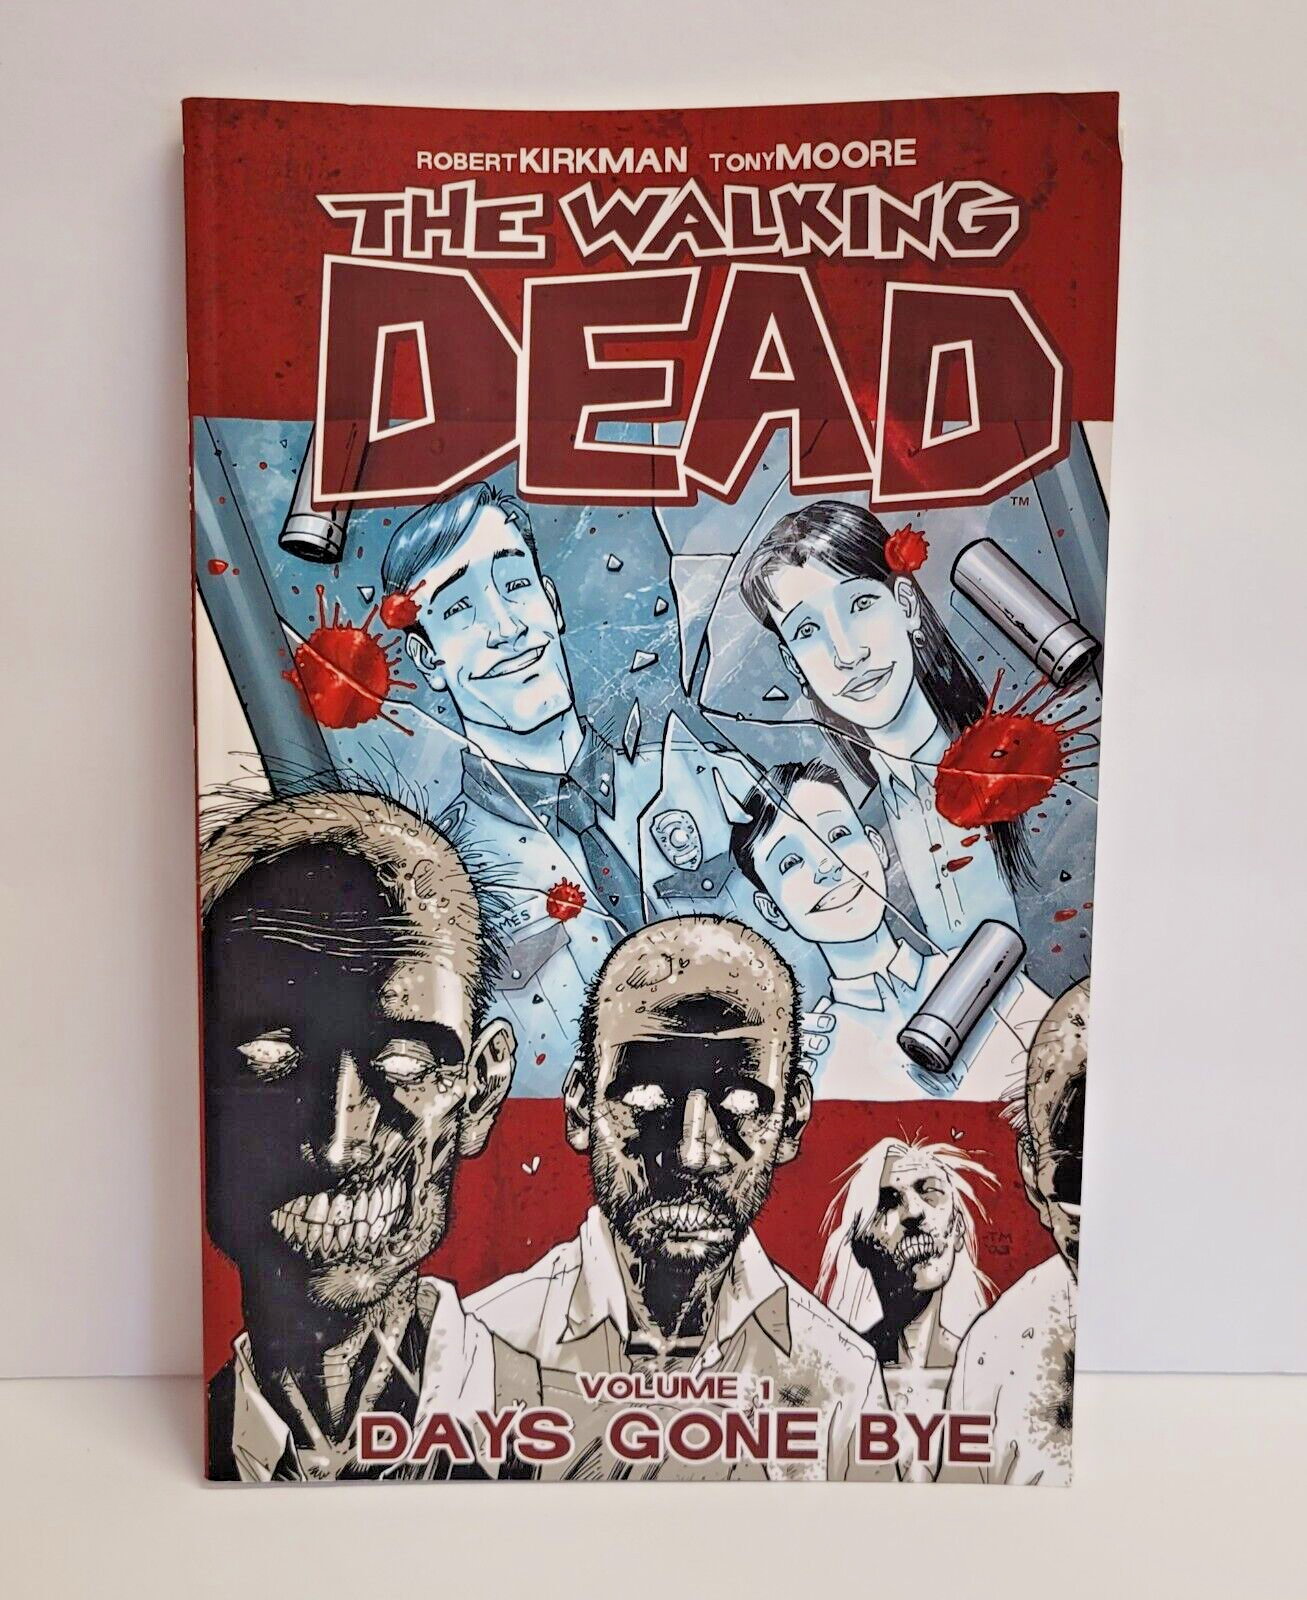 Primary image for The Walking Dead Volume 1: Days Gone Bye by Kirkman, Robert